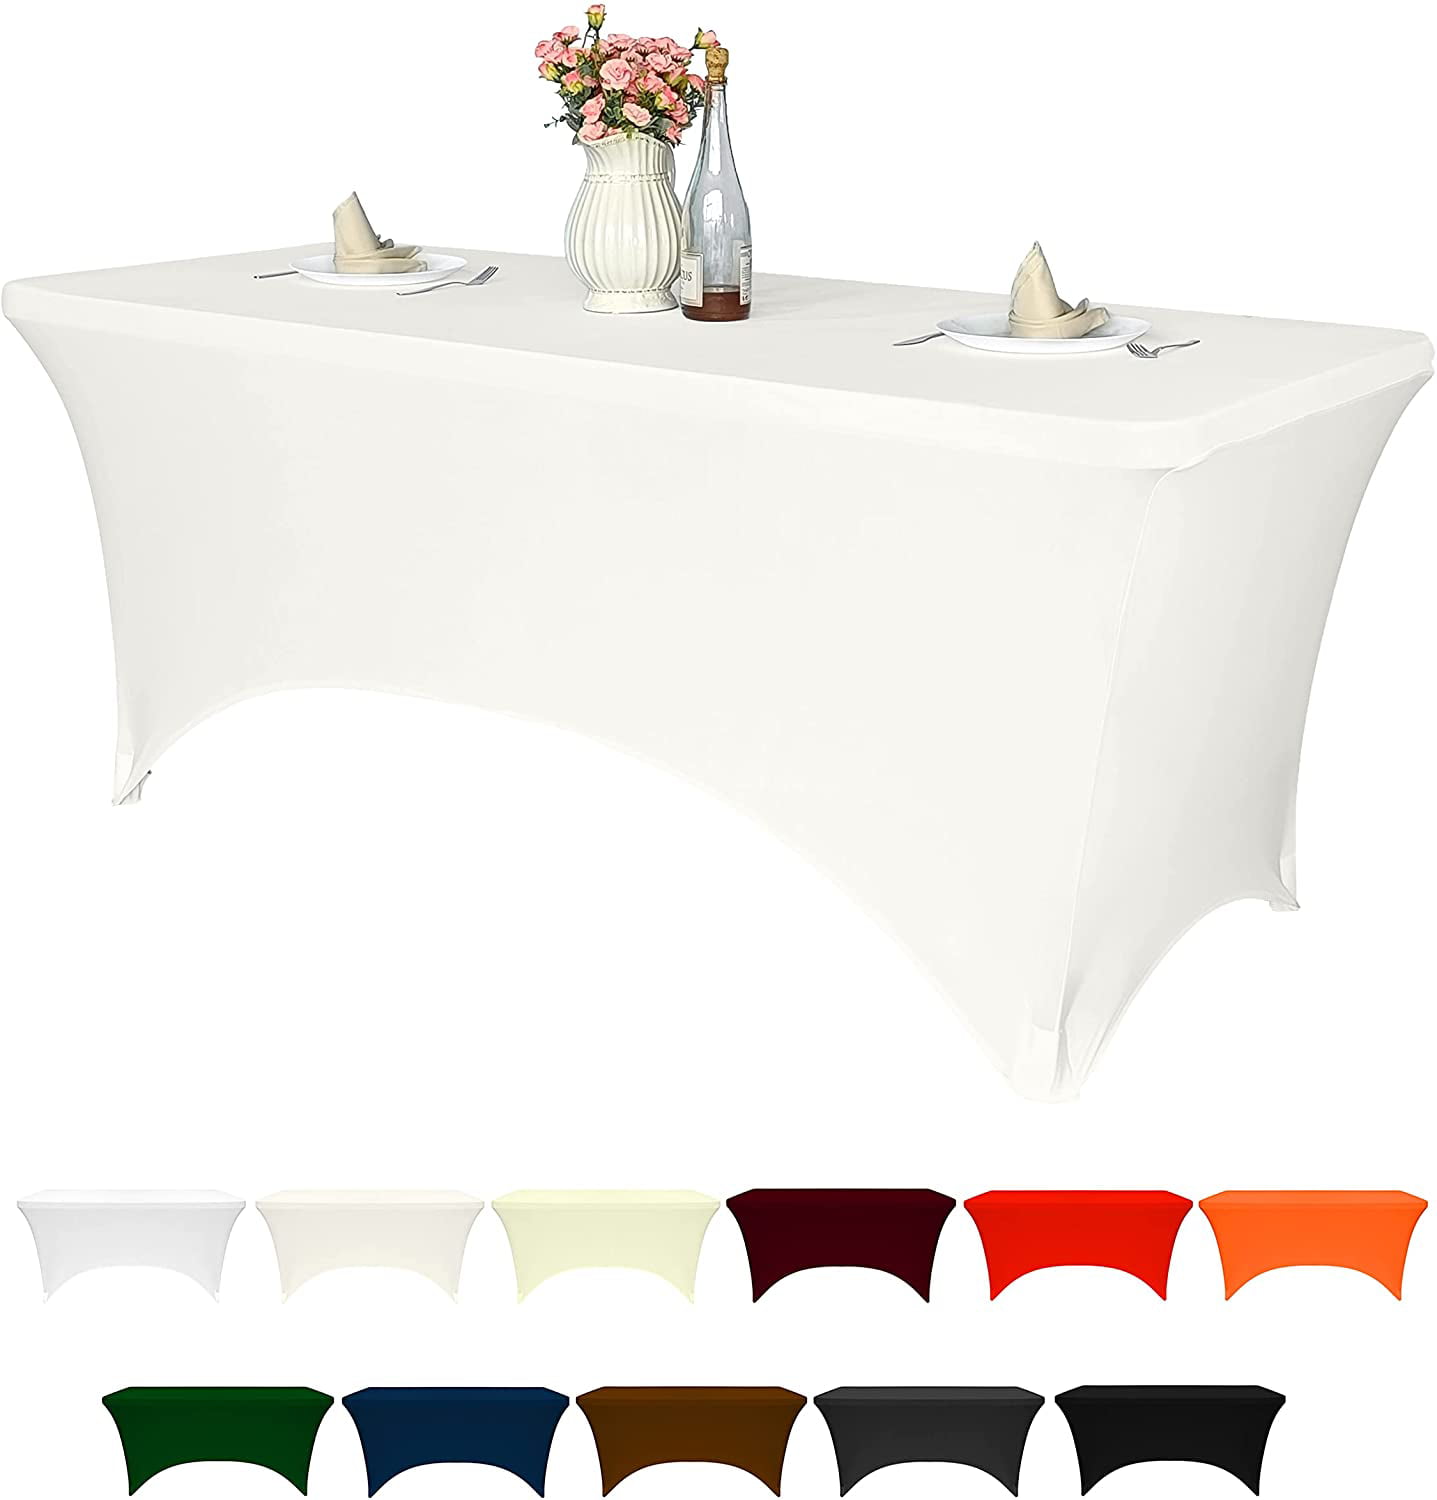 6' ft SPANDEX Fitted Tablecloth Stretch Table Cover Wedding Party BLACK 2 PACK 